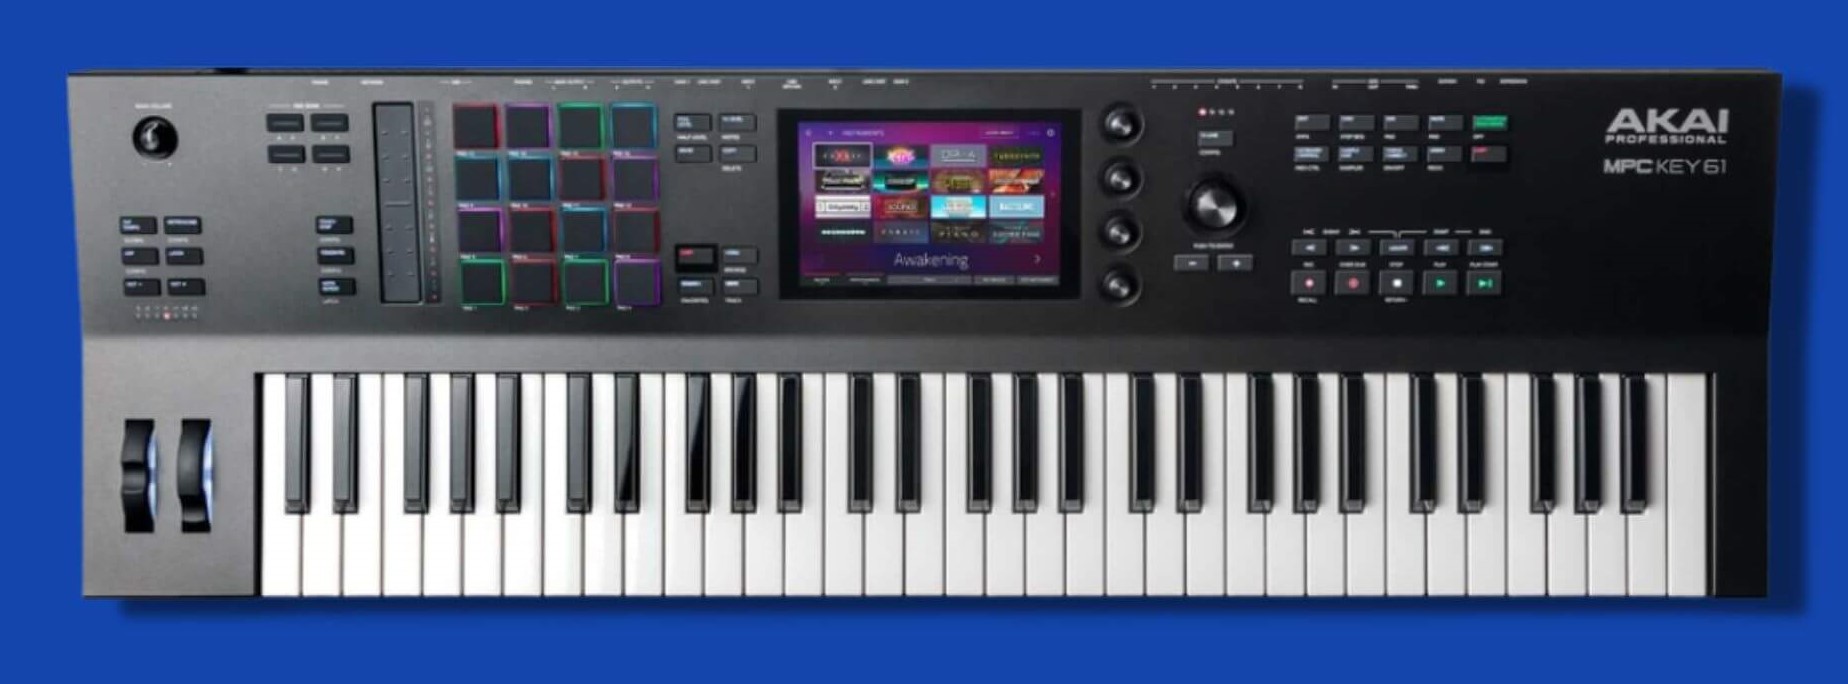 The interface of the AKAI MPC 61 Key is neatly laid out for ease of use. It's perfect for any playing style, and it's jam packed with features for both music composition & live performance! 